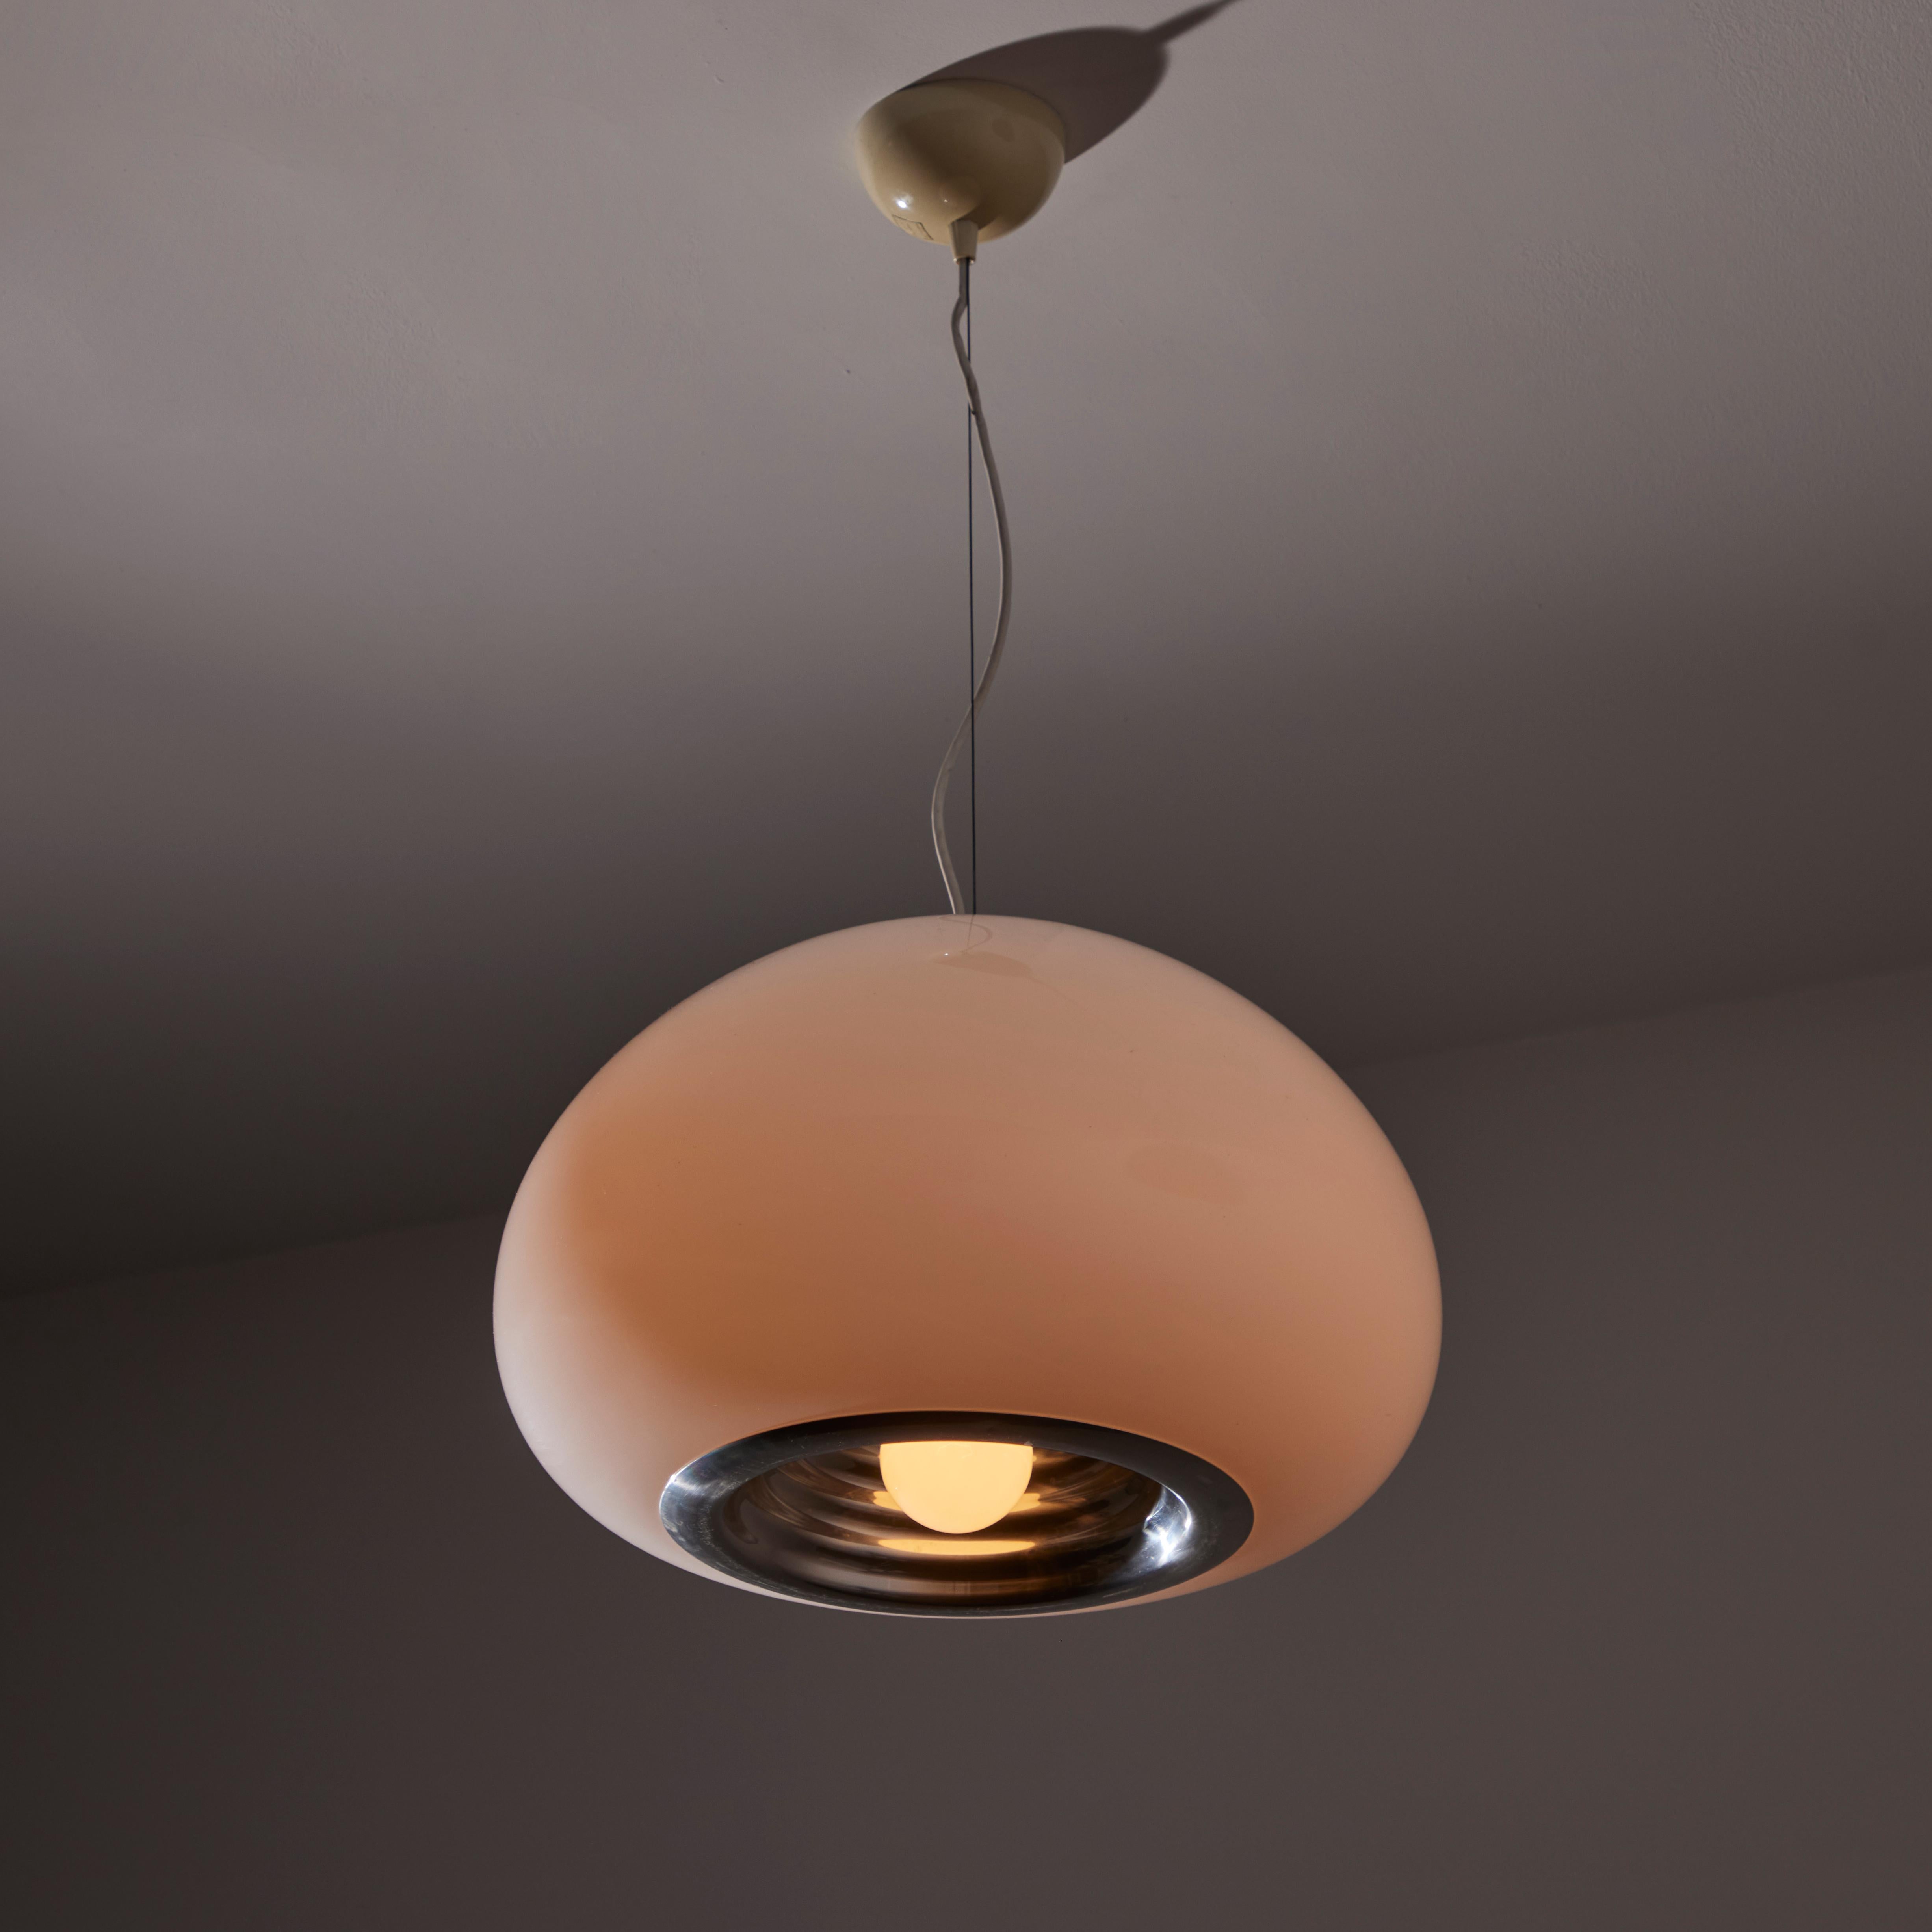 'Black and White' Ceiling Light by Achille & Pier Giacomo Castiglioni for Flos. Designed and manufactured in Italy in 1965. And opaline outer glass Dome with an interior rippled aluminum reflector. This light holds a single e27 socket type, adapted